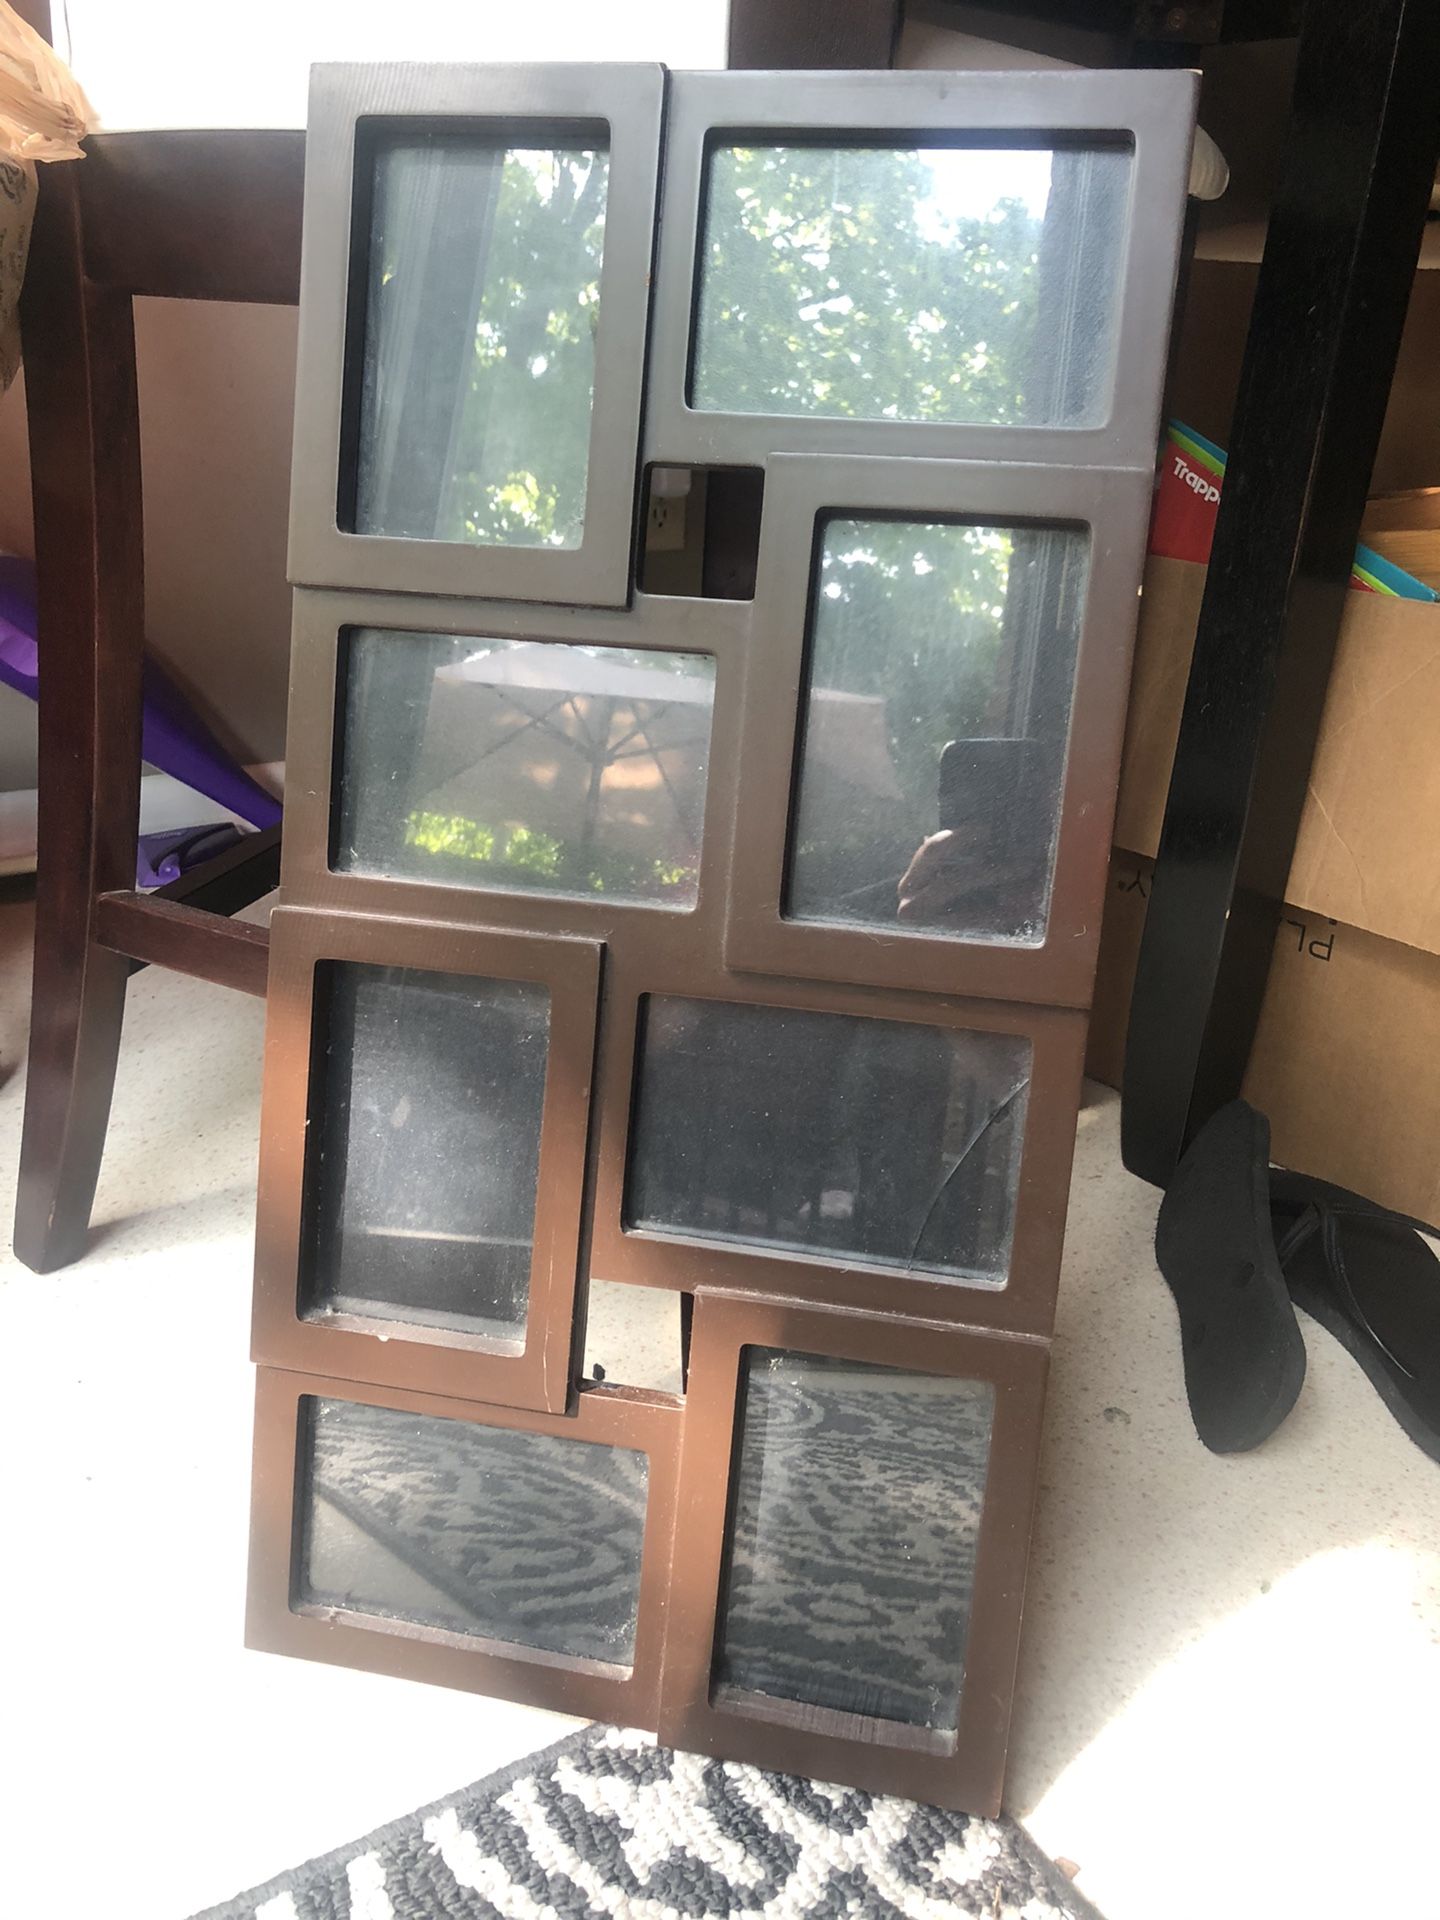 8 stacked 4x6 photo frame